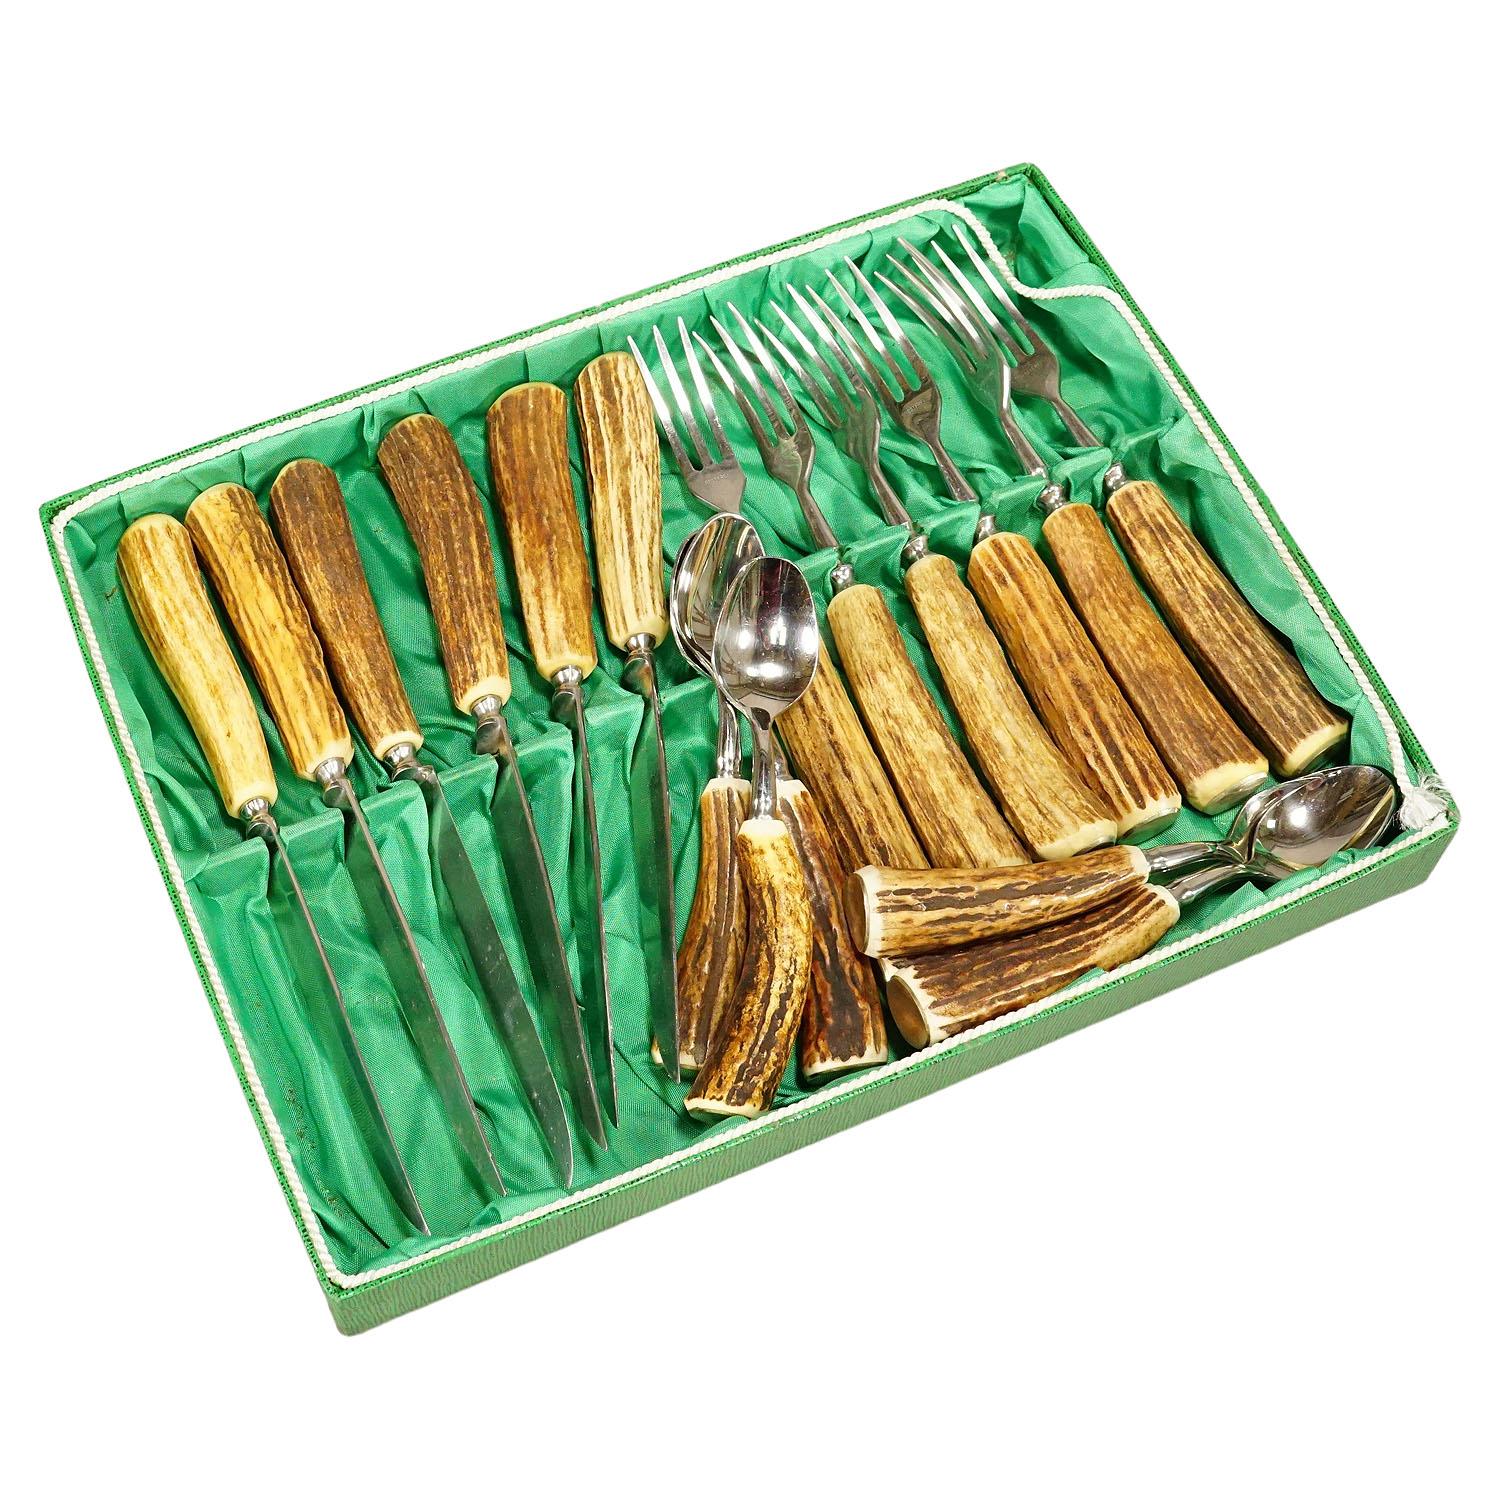 Vintage Stainless Steel and Horn Tableware 18 Pieces Set Solingen, Germany

A rustic tabelware set consisting of six steak knives, forks and spoons. The handles are made of genuine deer horn and feature a silver knob on their ends. The blades are